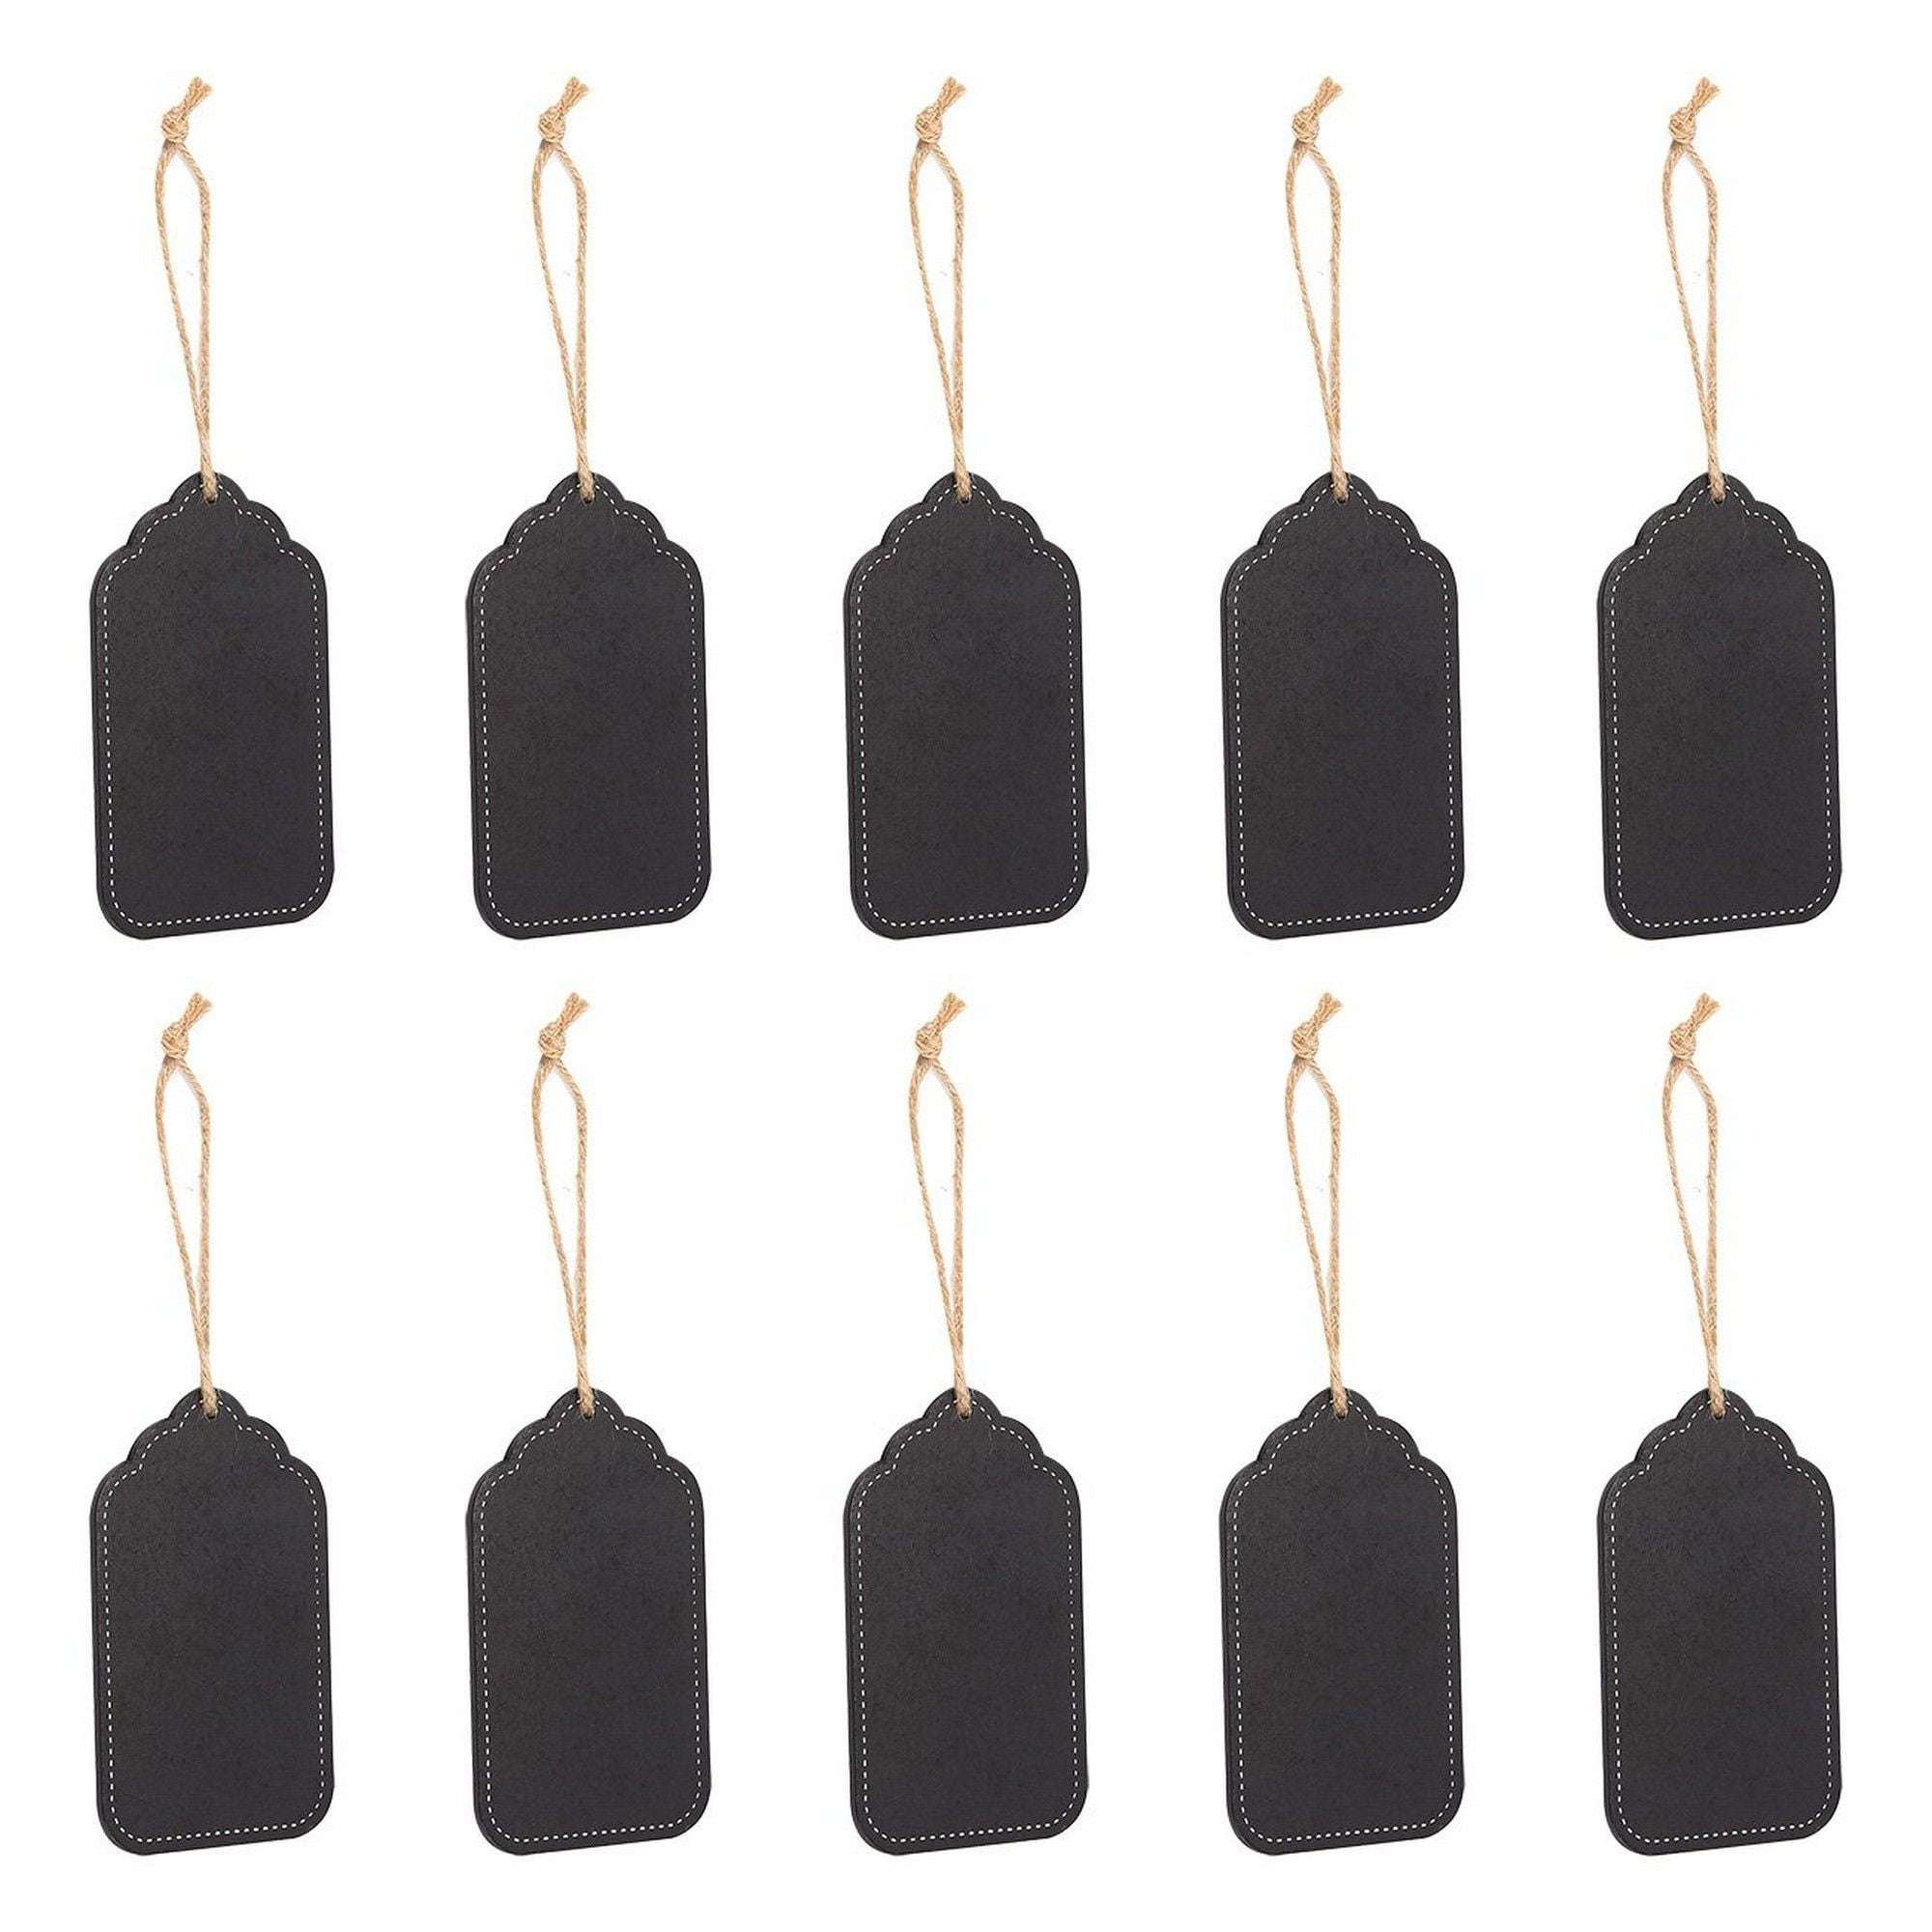 10 Mini Chalkboard Hanging Tag Wedding Party Favors Black/Wood Storage Gifts 